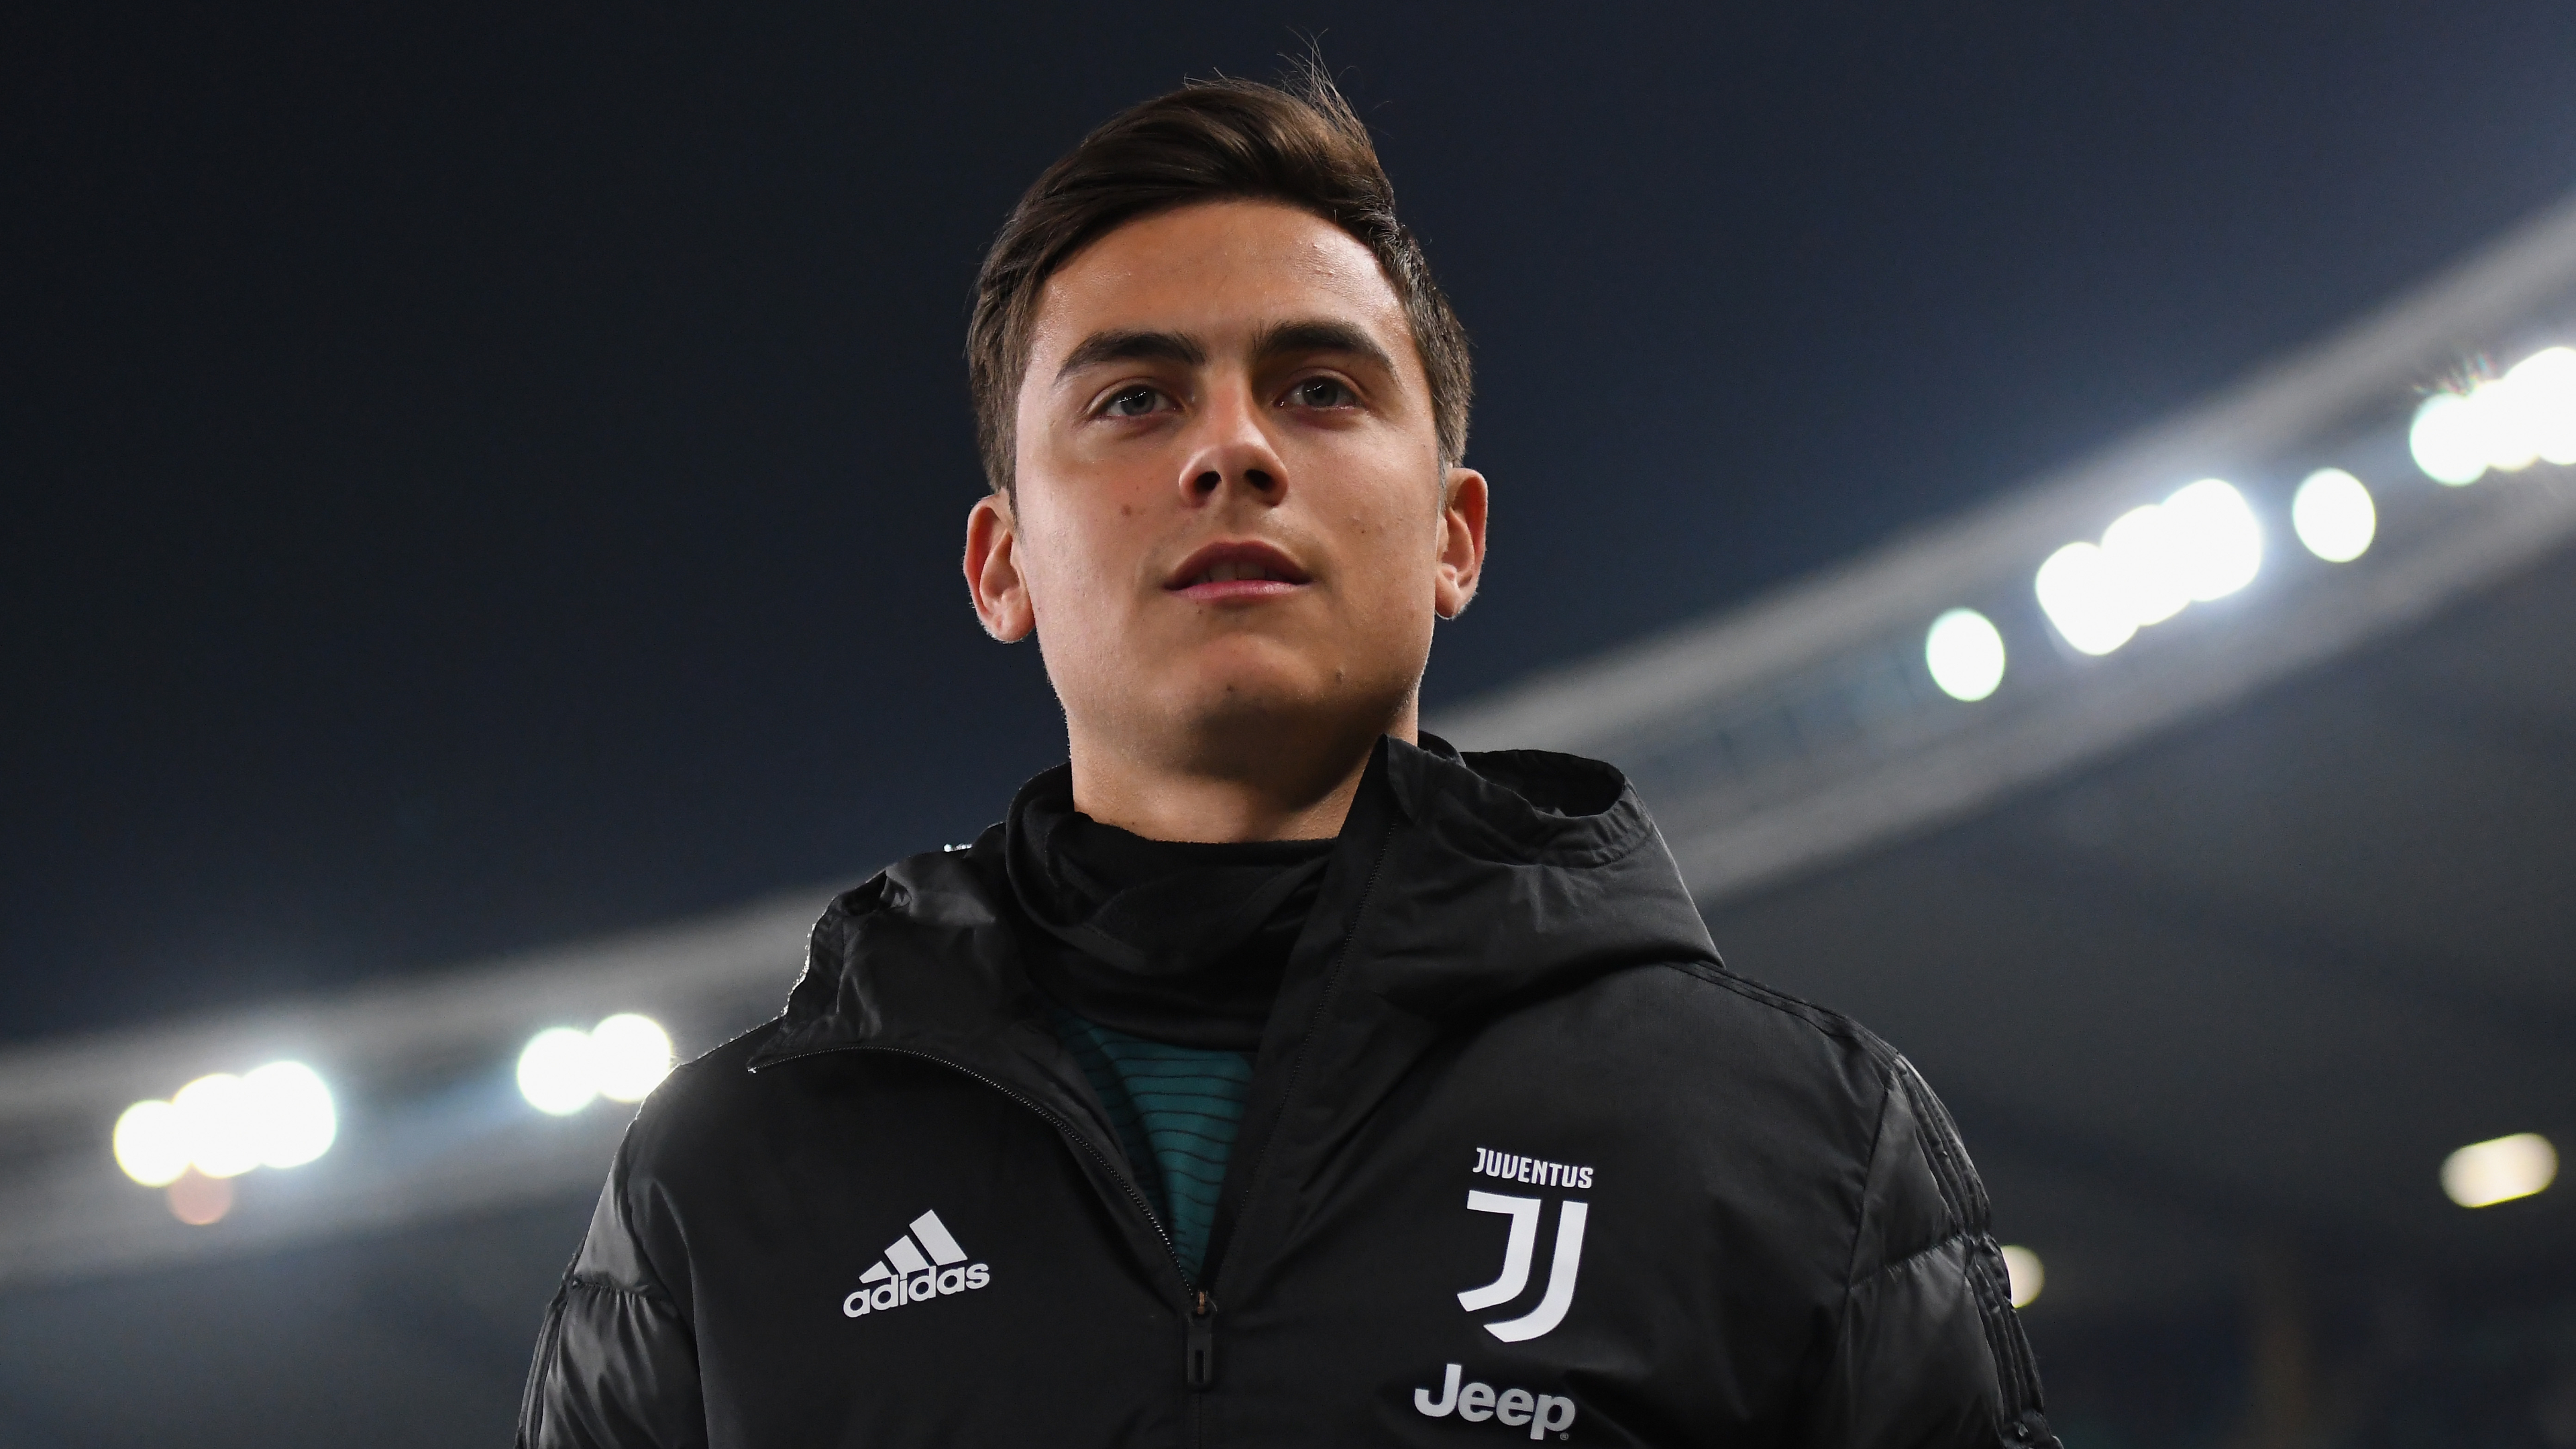 Dybala in advanced talks with Juventus over extension, claims Paratici